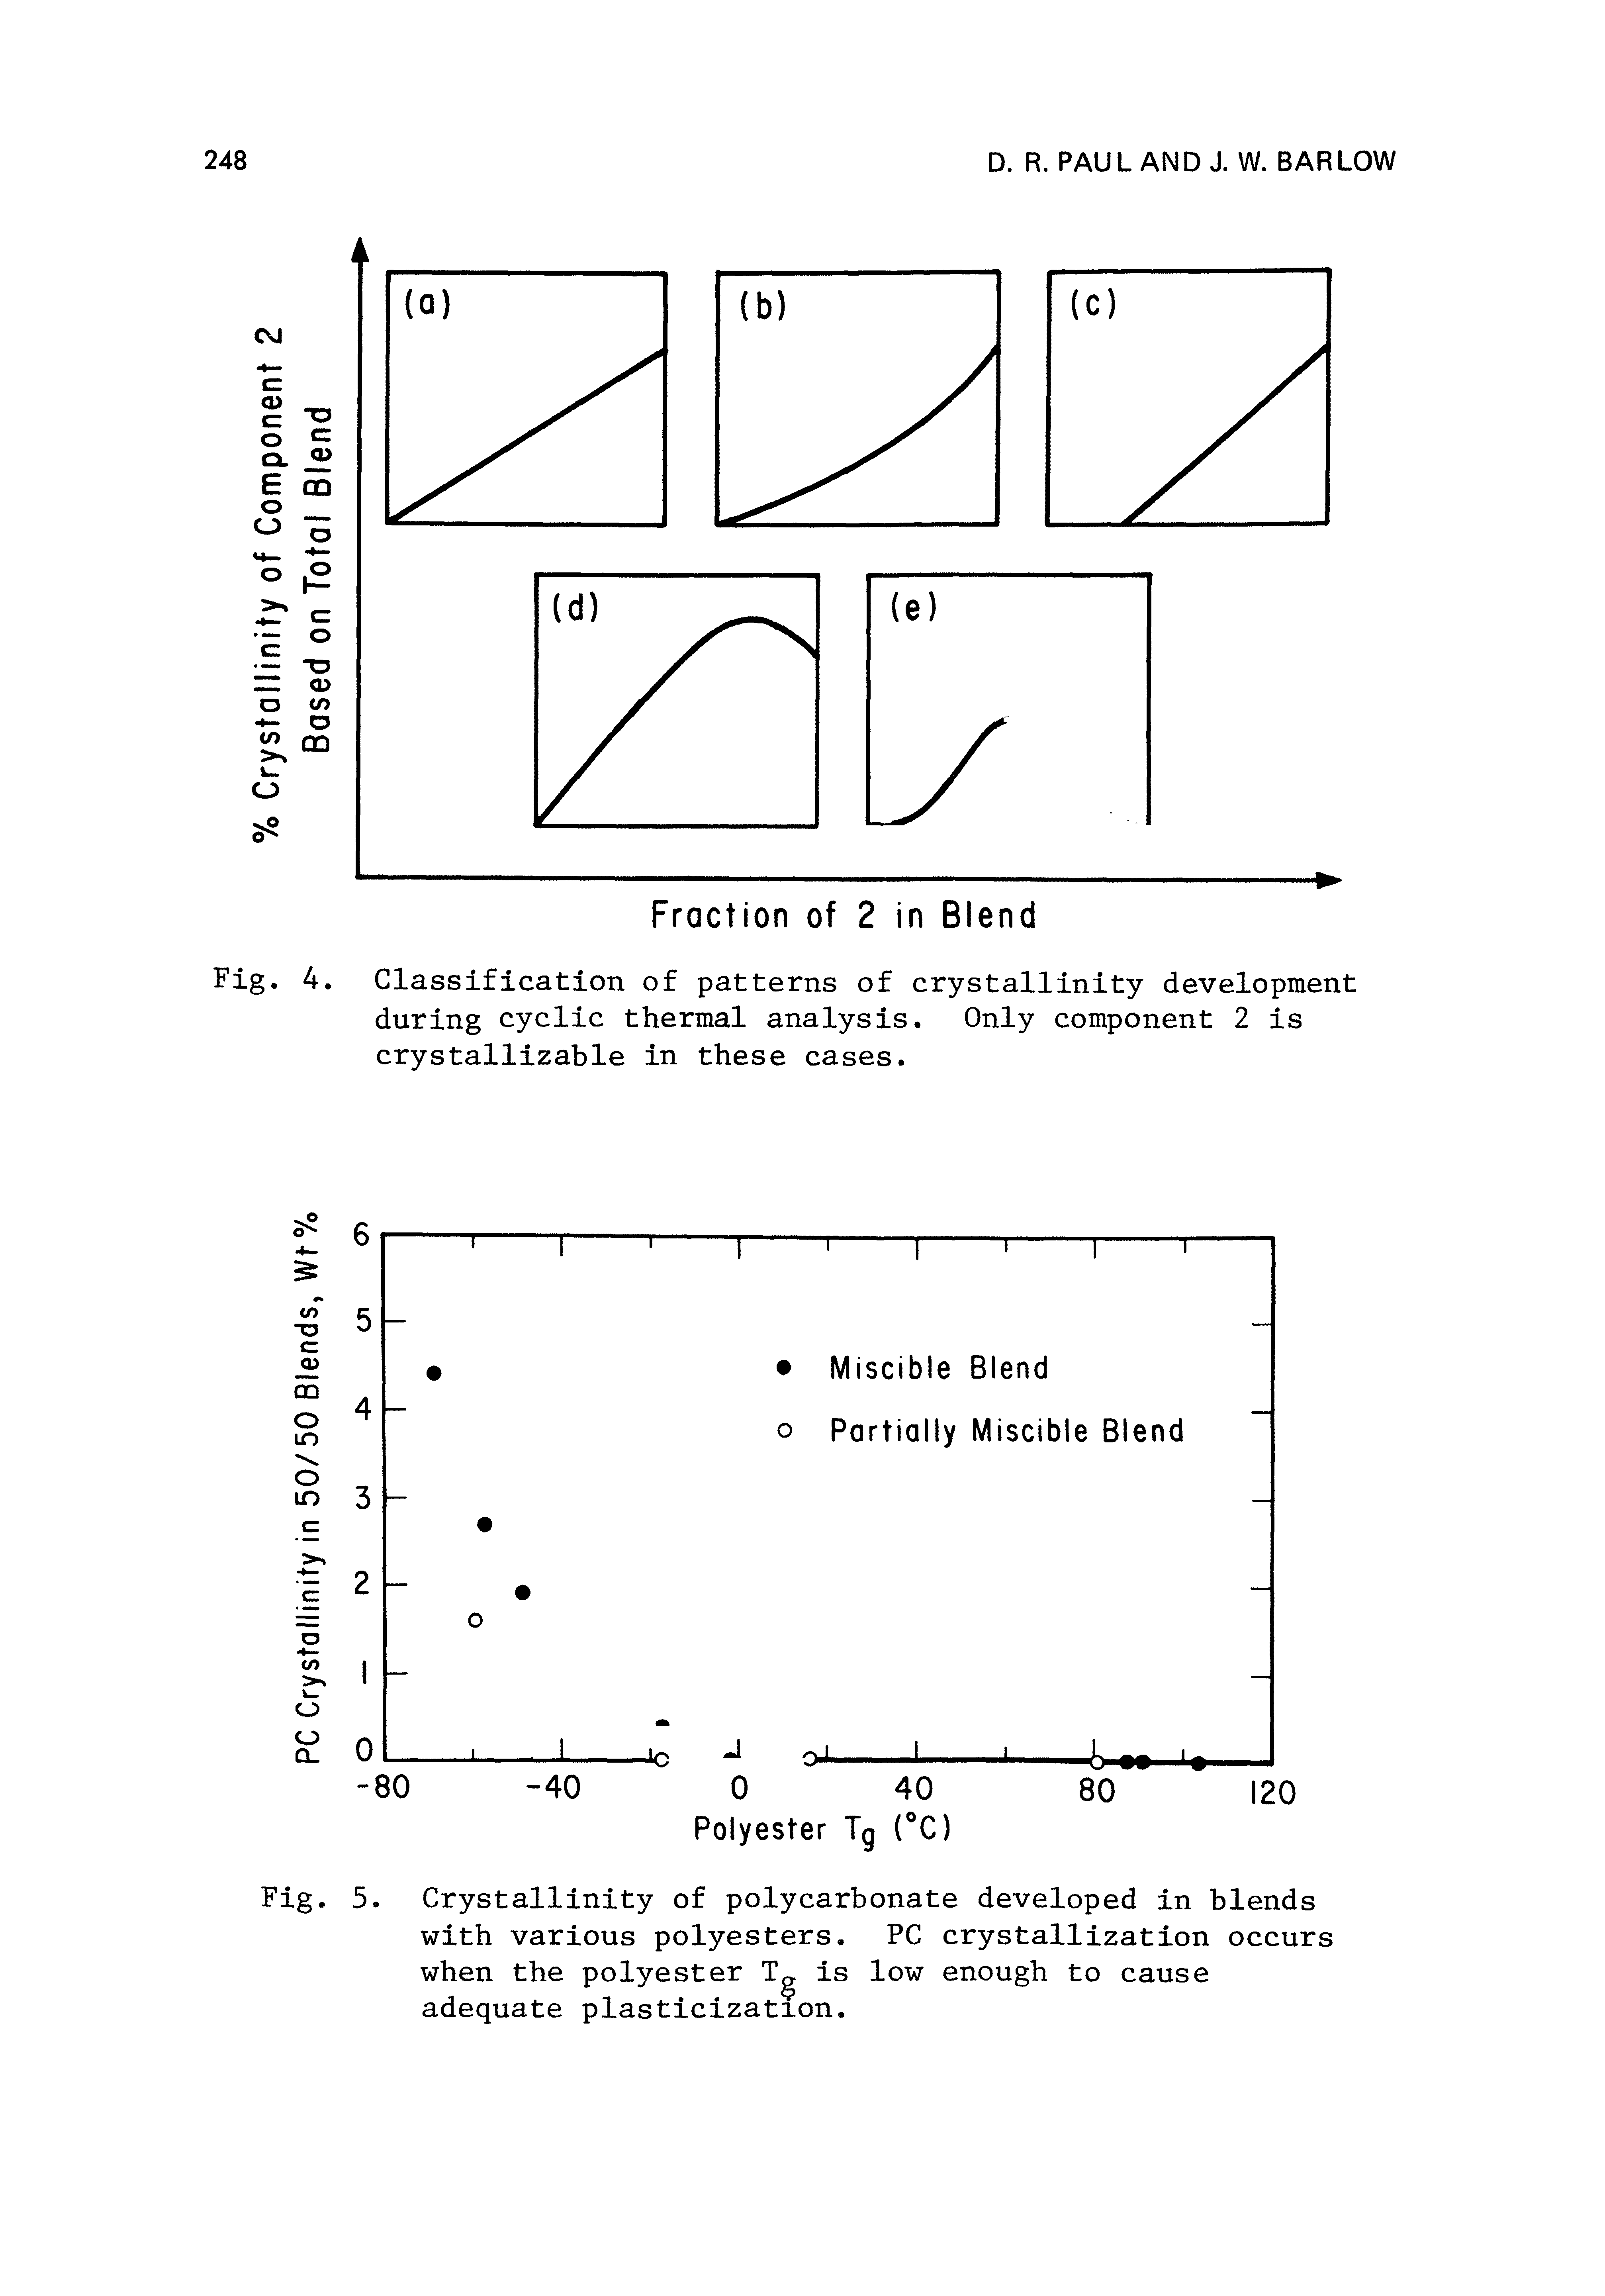 Fig. 5. Crystallinity of polycarbonate developed in blends with various polyesters. PC crystallization occurs when the polyester Tg is low enough to cause adequate plasticization.